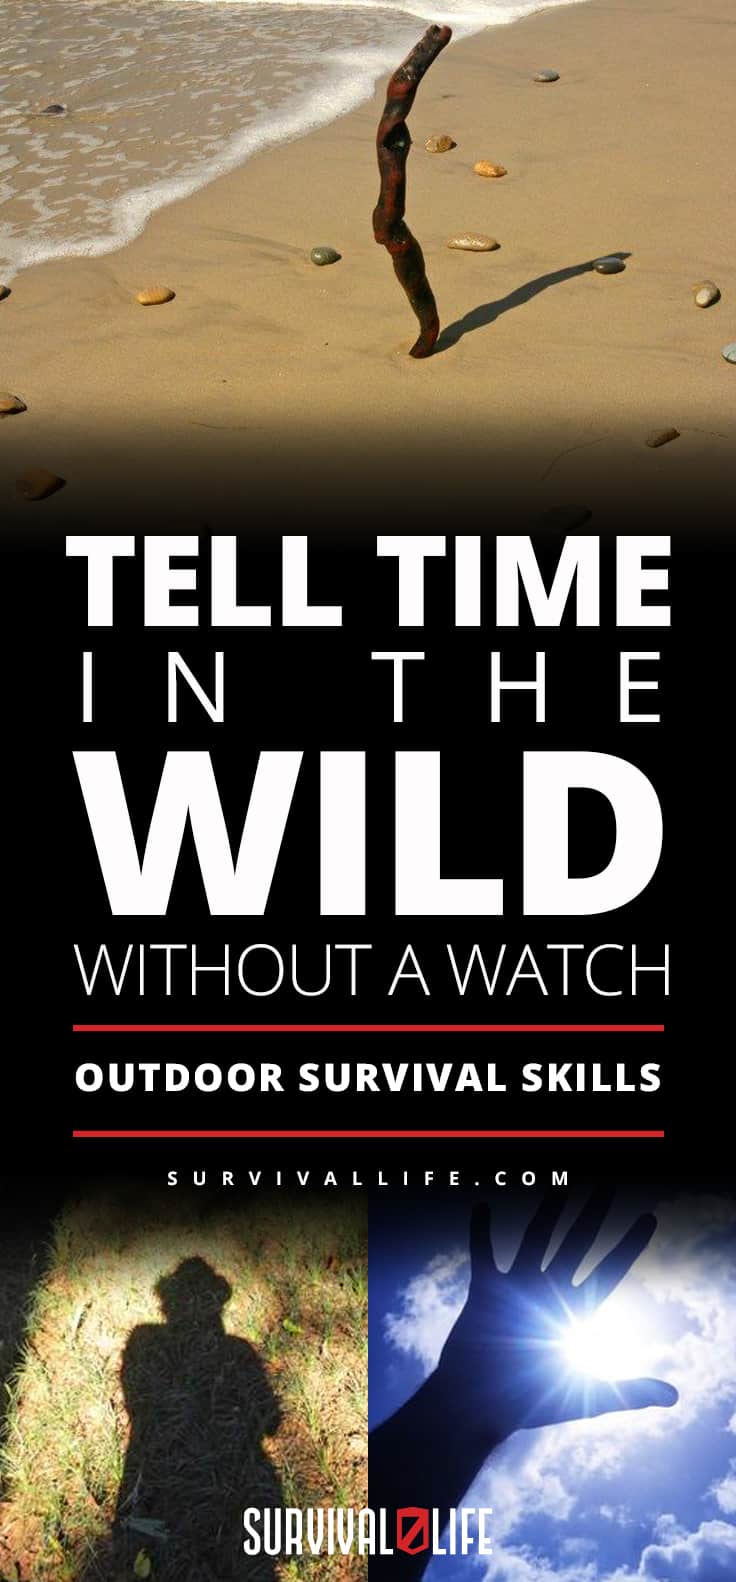 Outdoor Survival Skills | Tell Time In The Wild Without A Watch | https://survivallife.com/outdoor-survival-skills-tell-time/